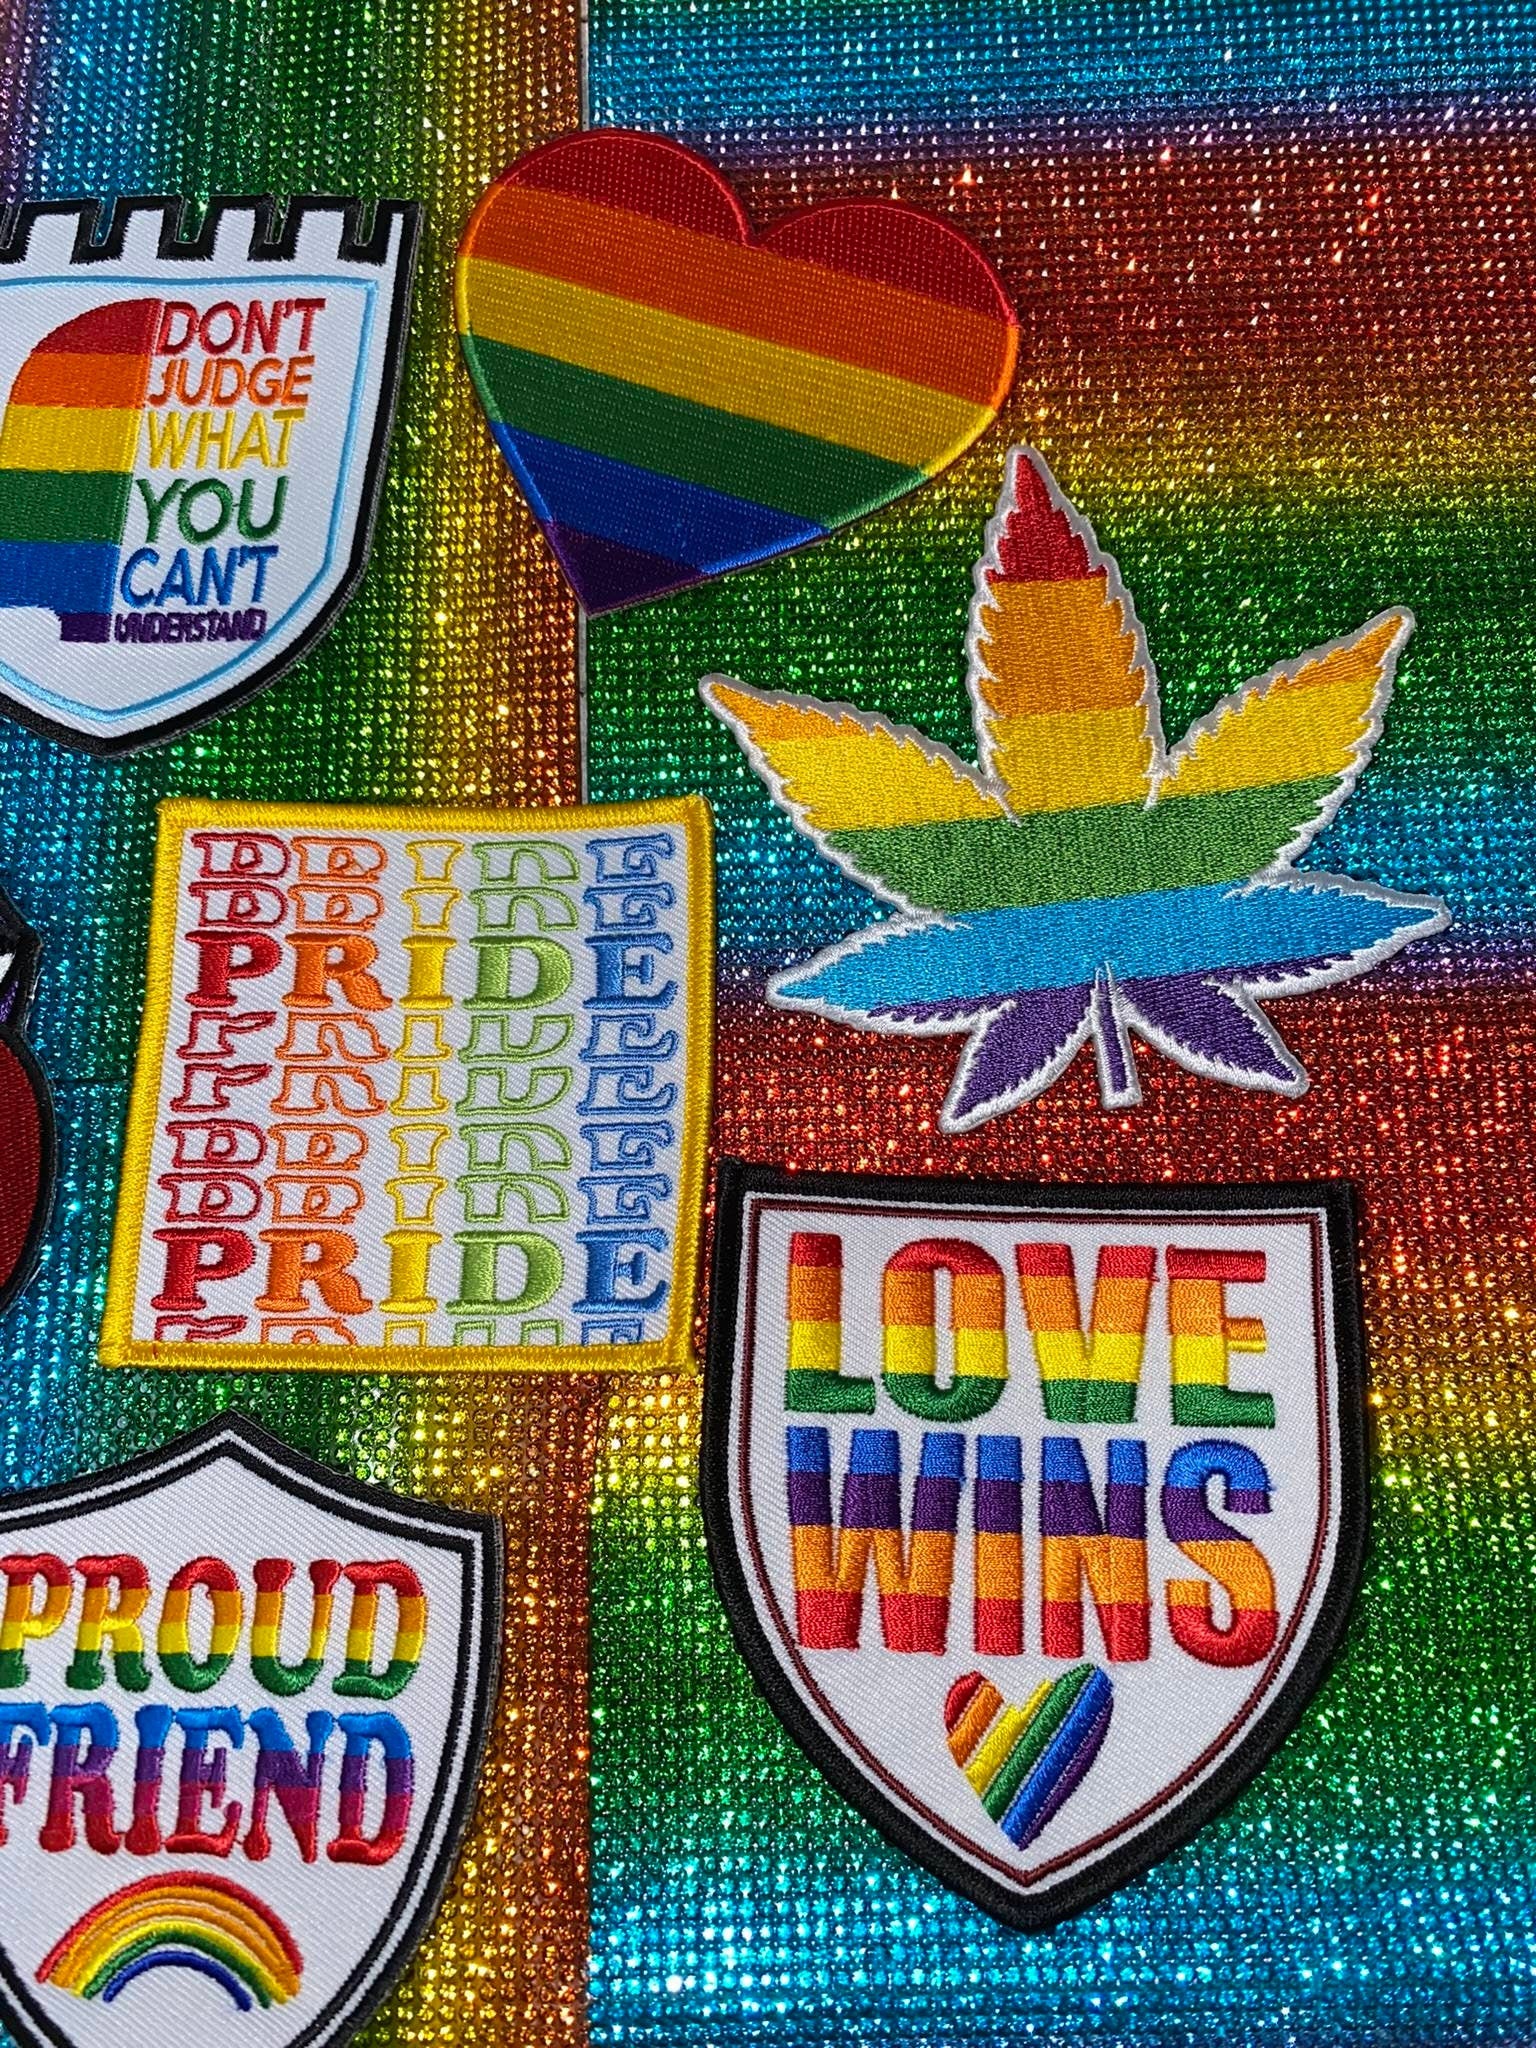 10-pc Pride Collection: Full Set of Embroidered LGBTQ Patches for Jackets, Hats, Crocs, Bags, & Apparel, Pride Gifts, Assorted Gift Bag